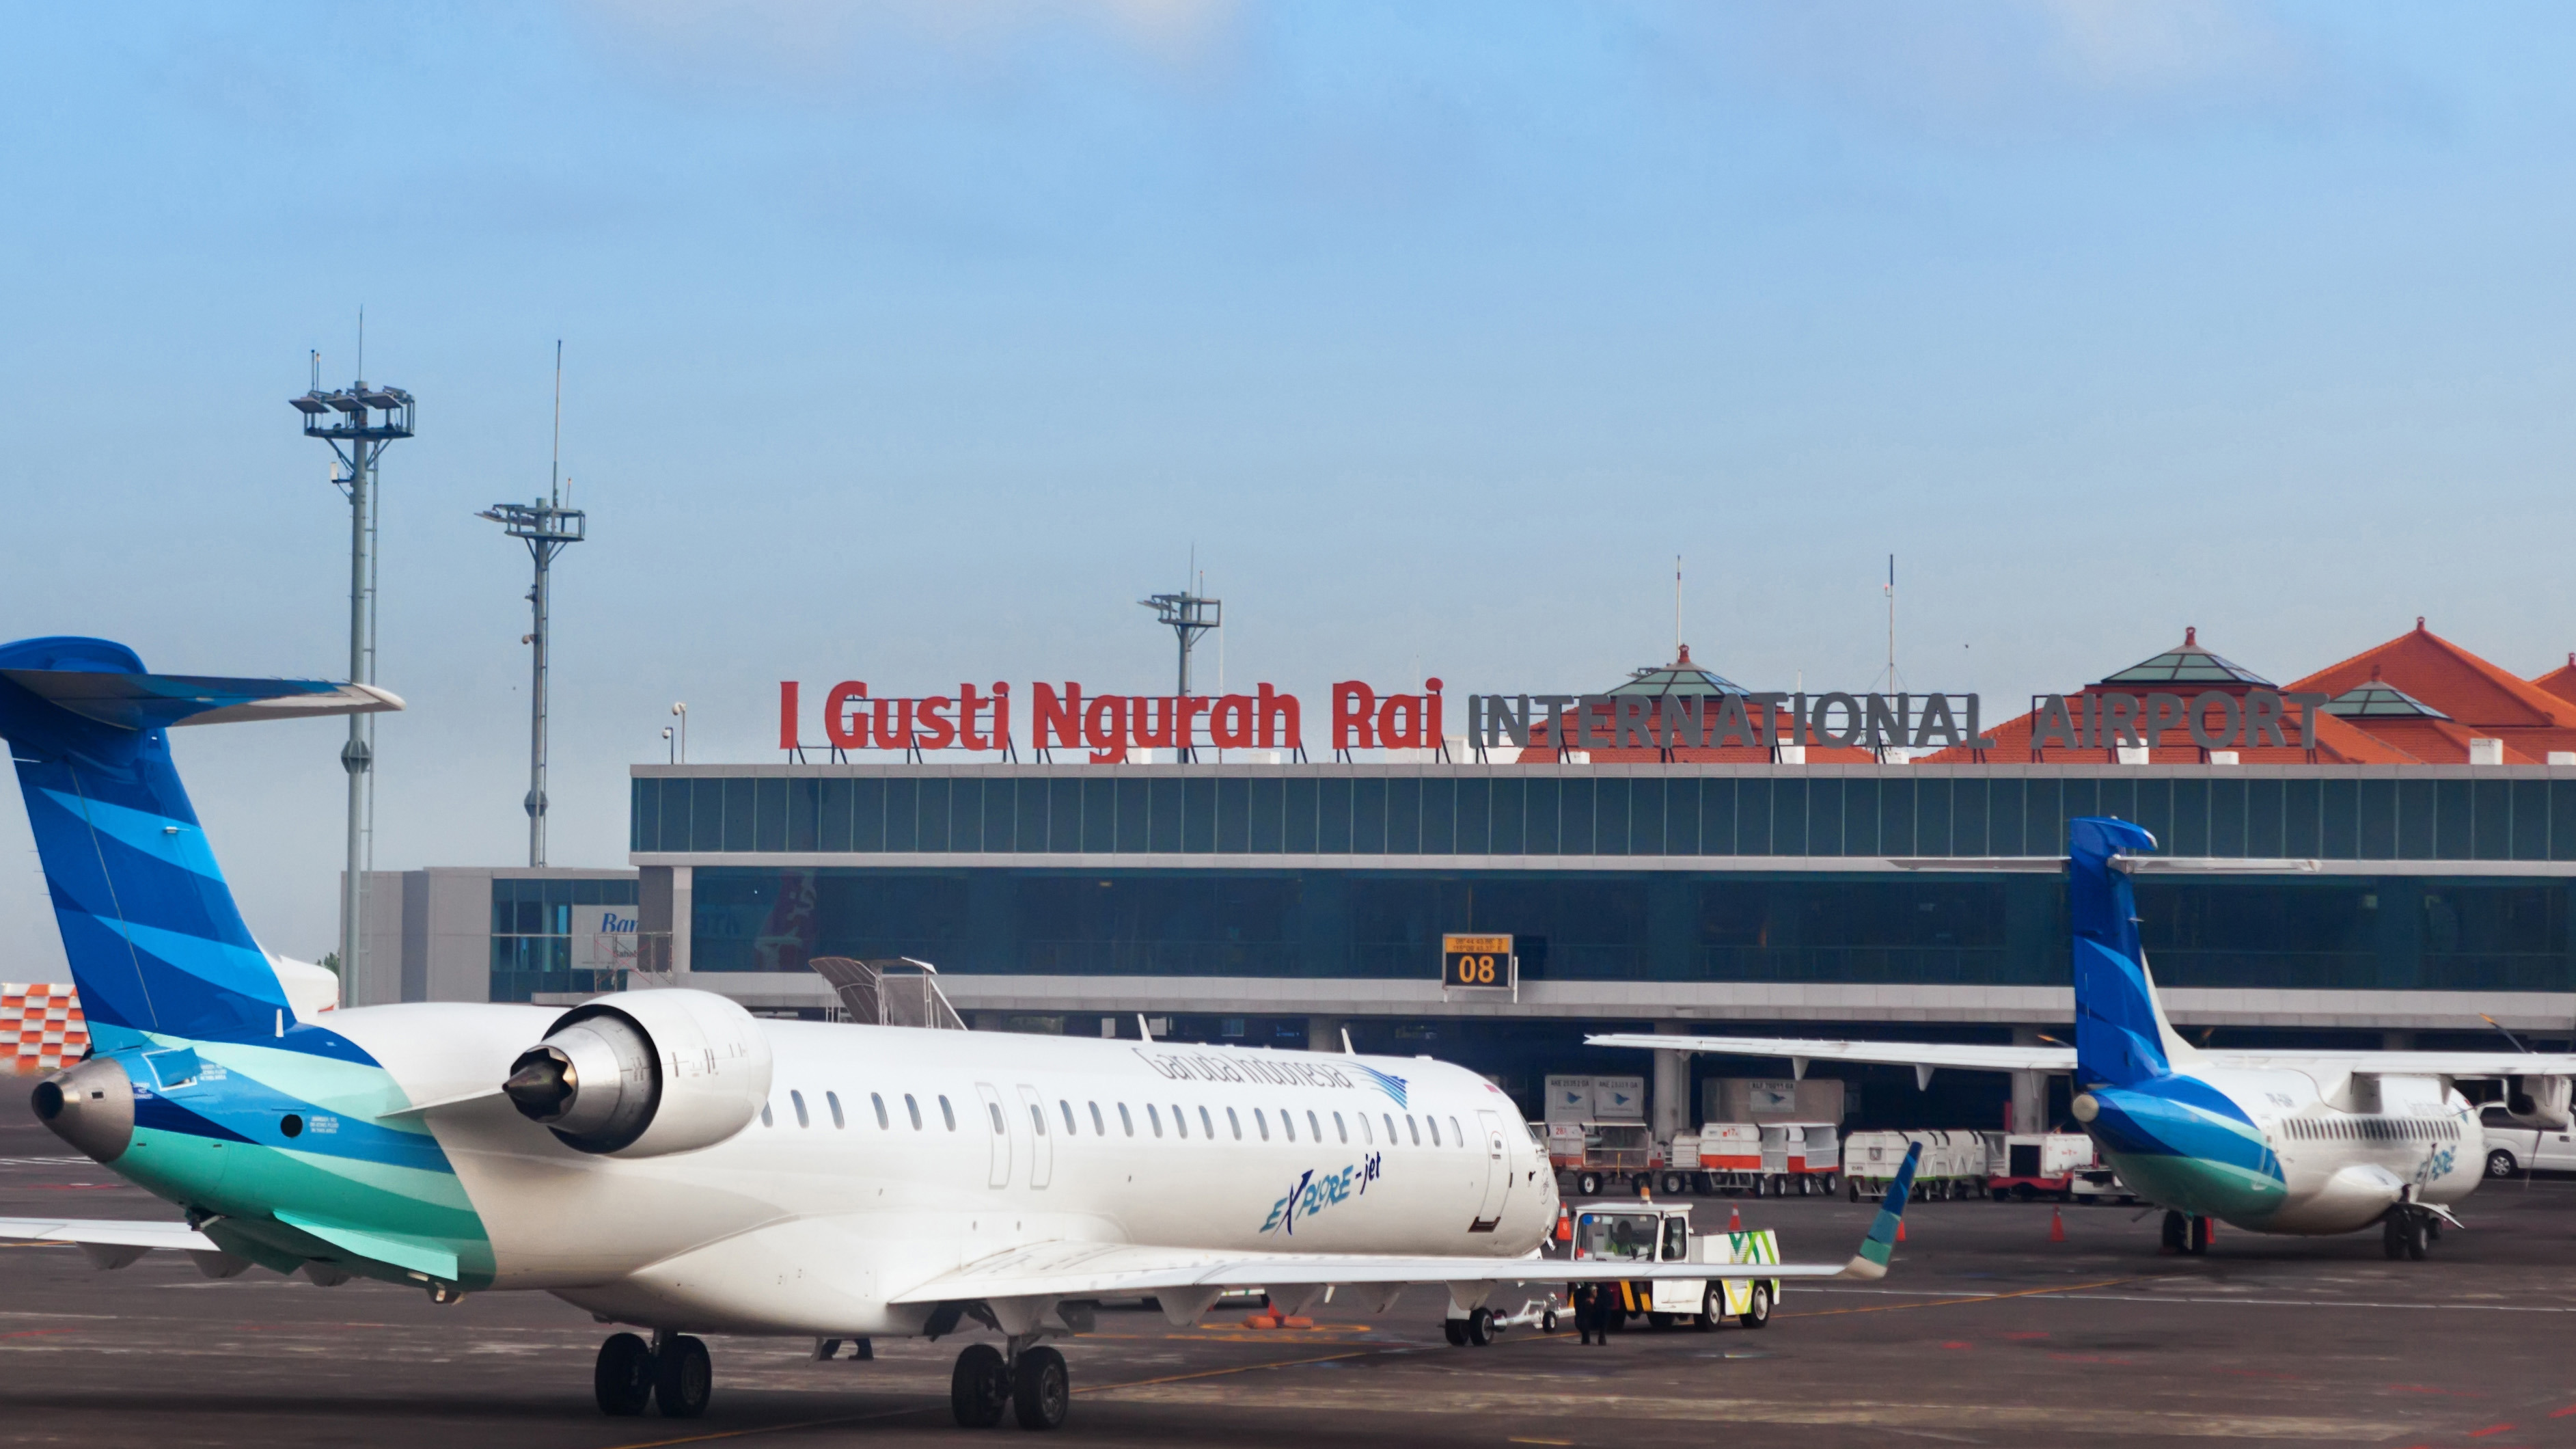 A $15 tourist tax will be collected from next year at Denpasar International Airport Ngurah Rai in Bali.